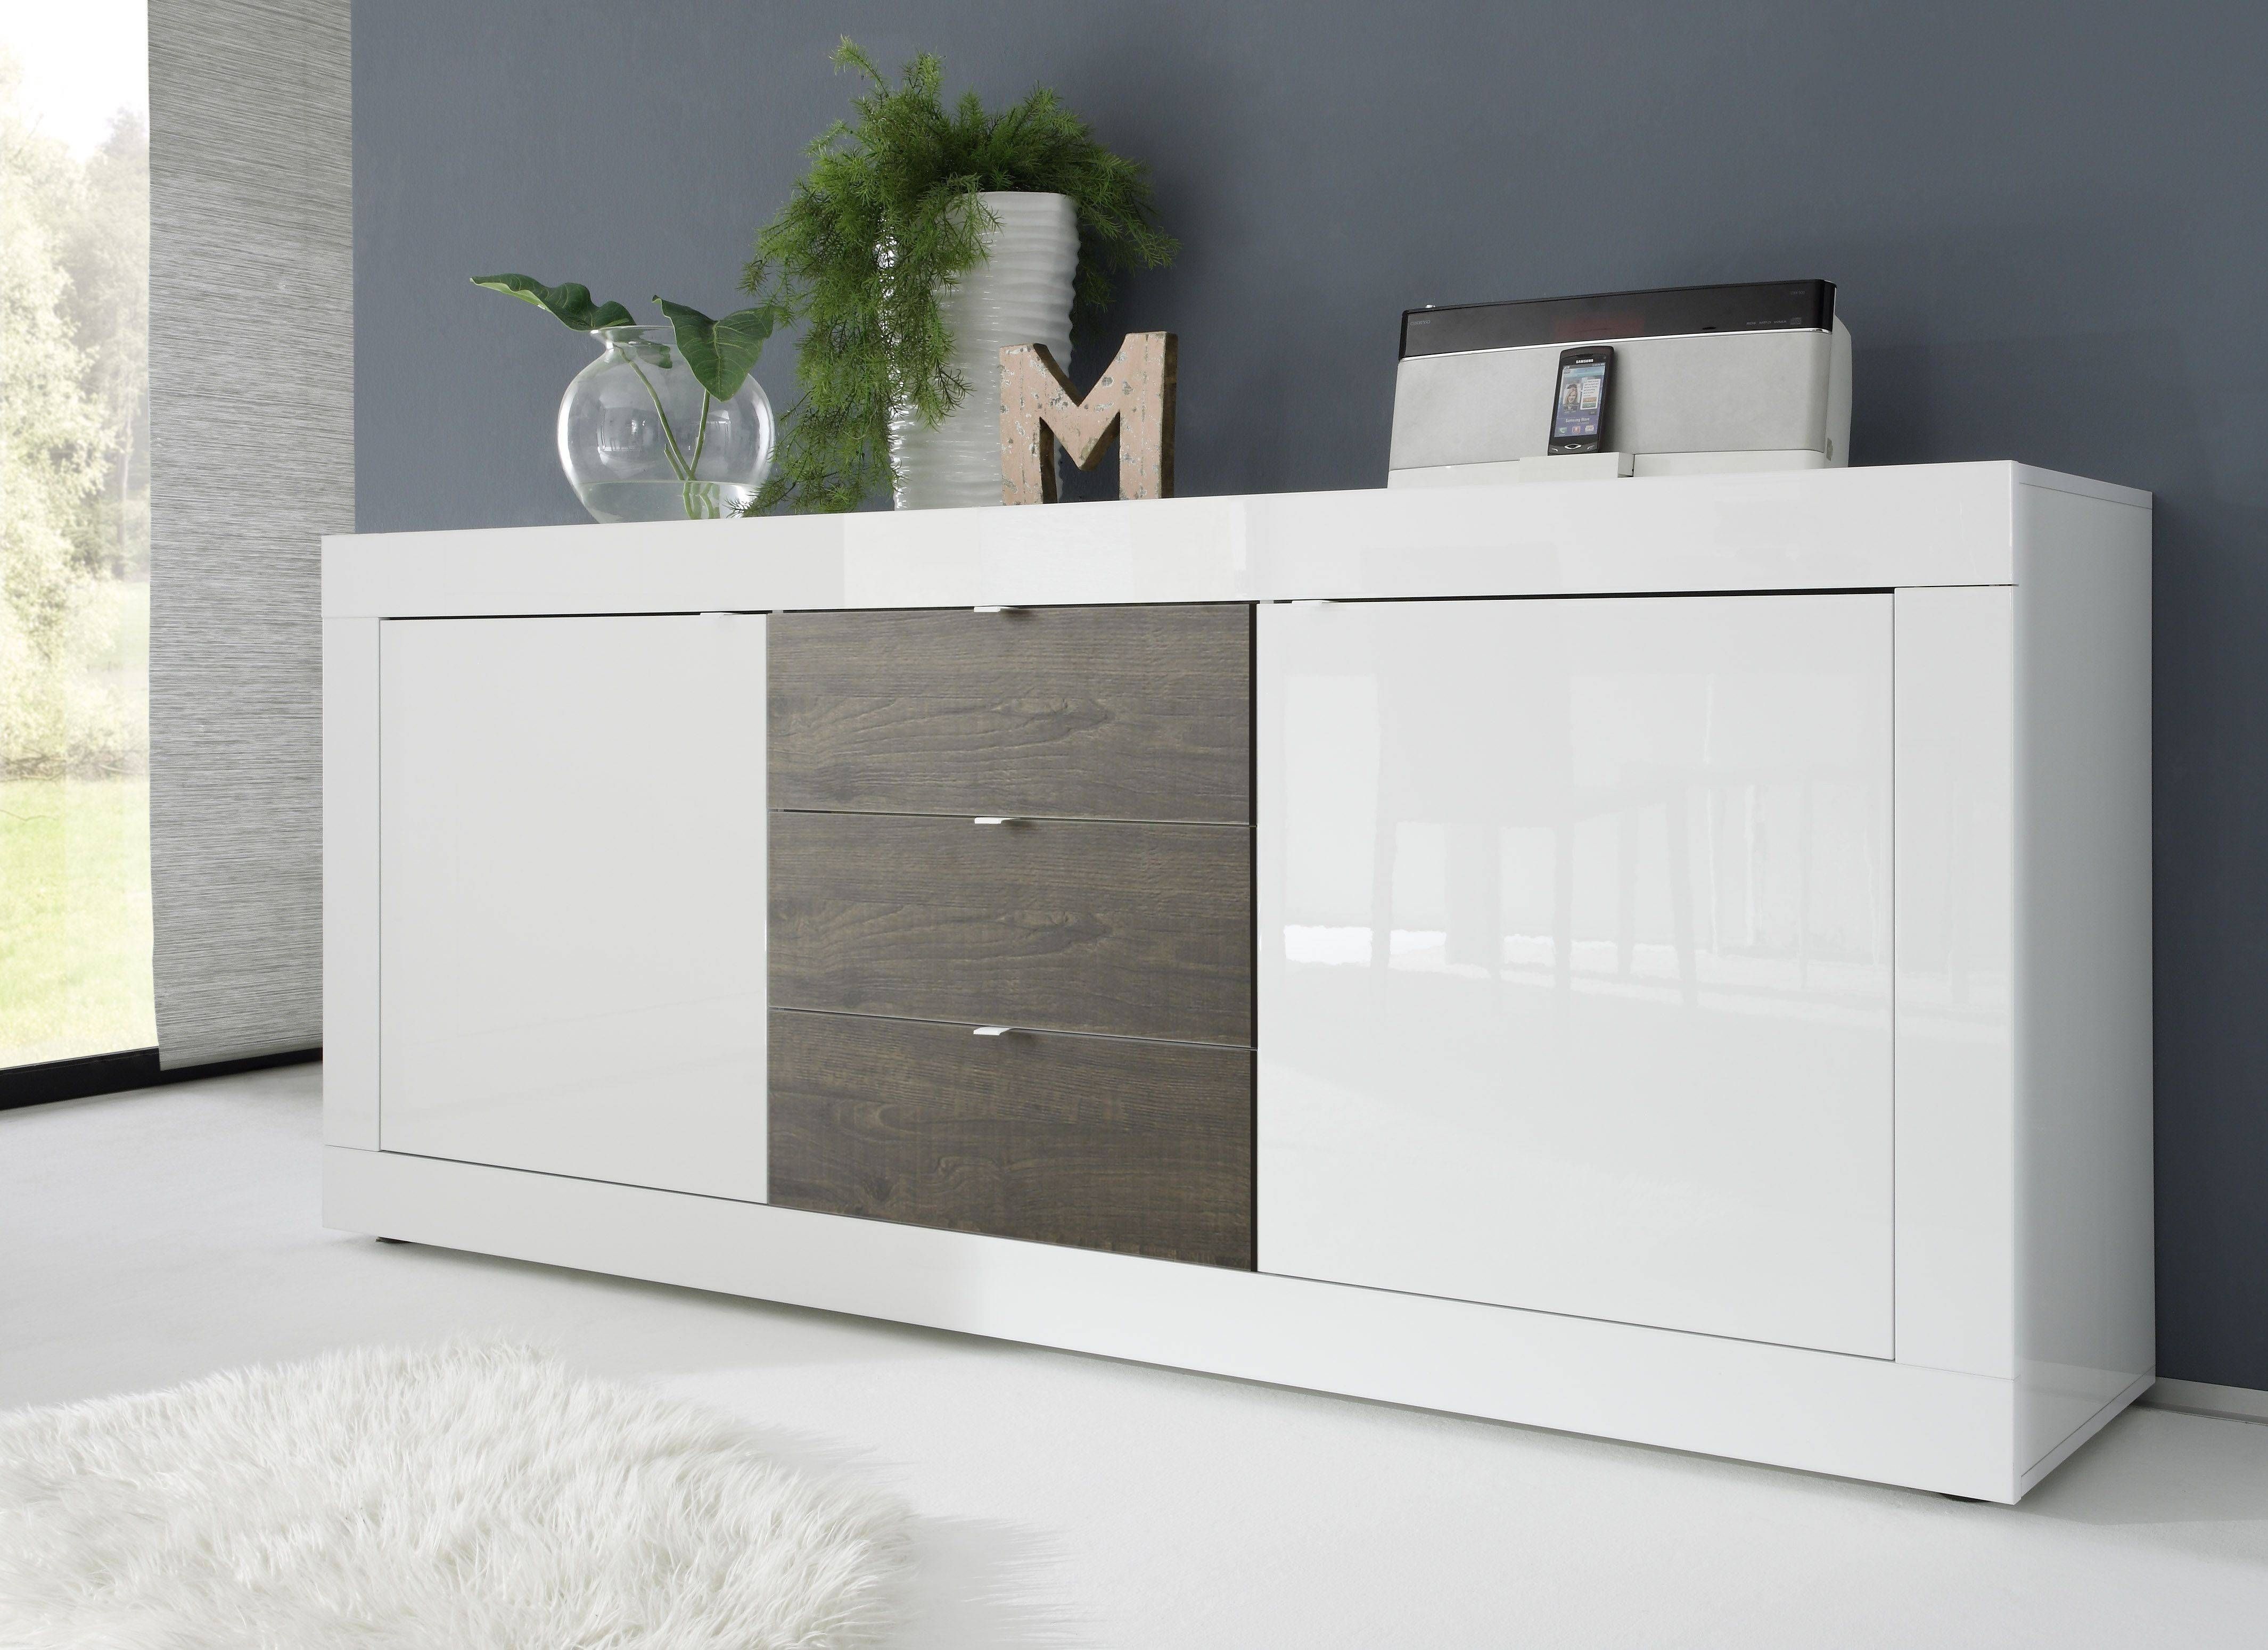 Basic Sideboard, White + Wenge Buy Online At Best Price – Sohomod Within Recent Wenge Sideboards (View 5 of 15)